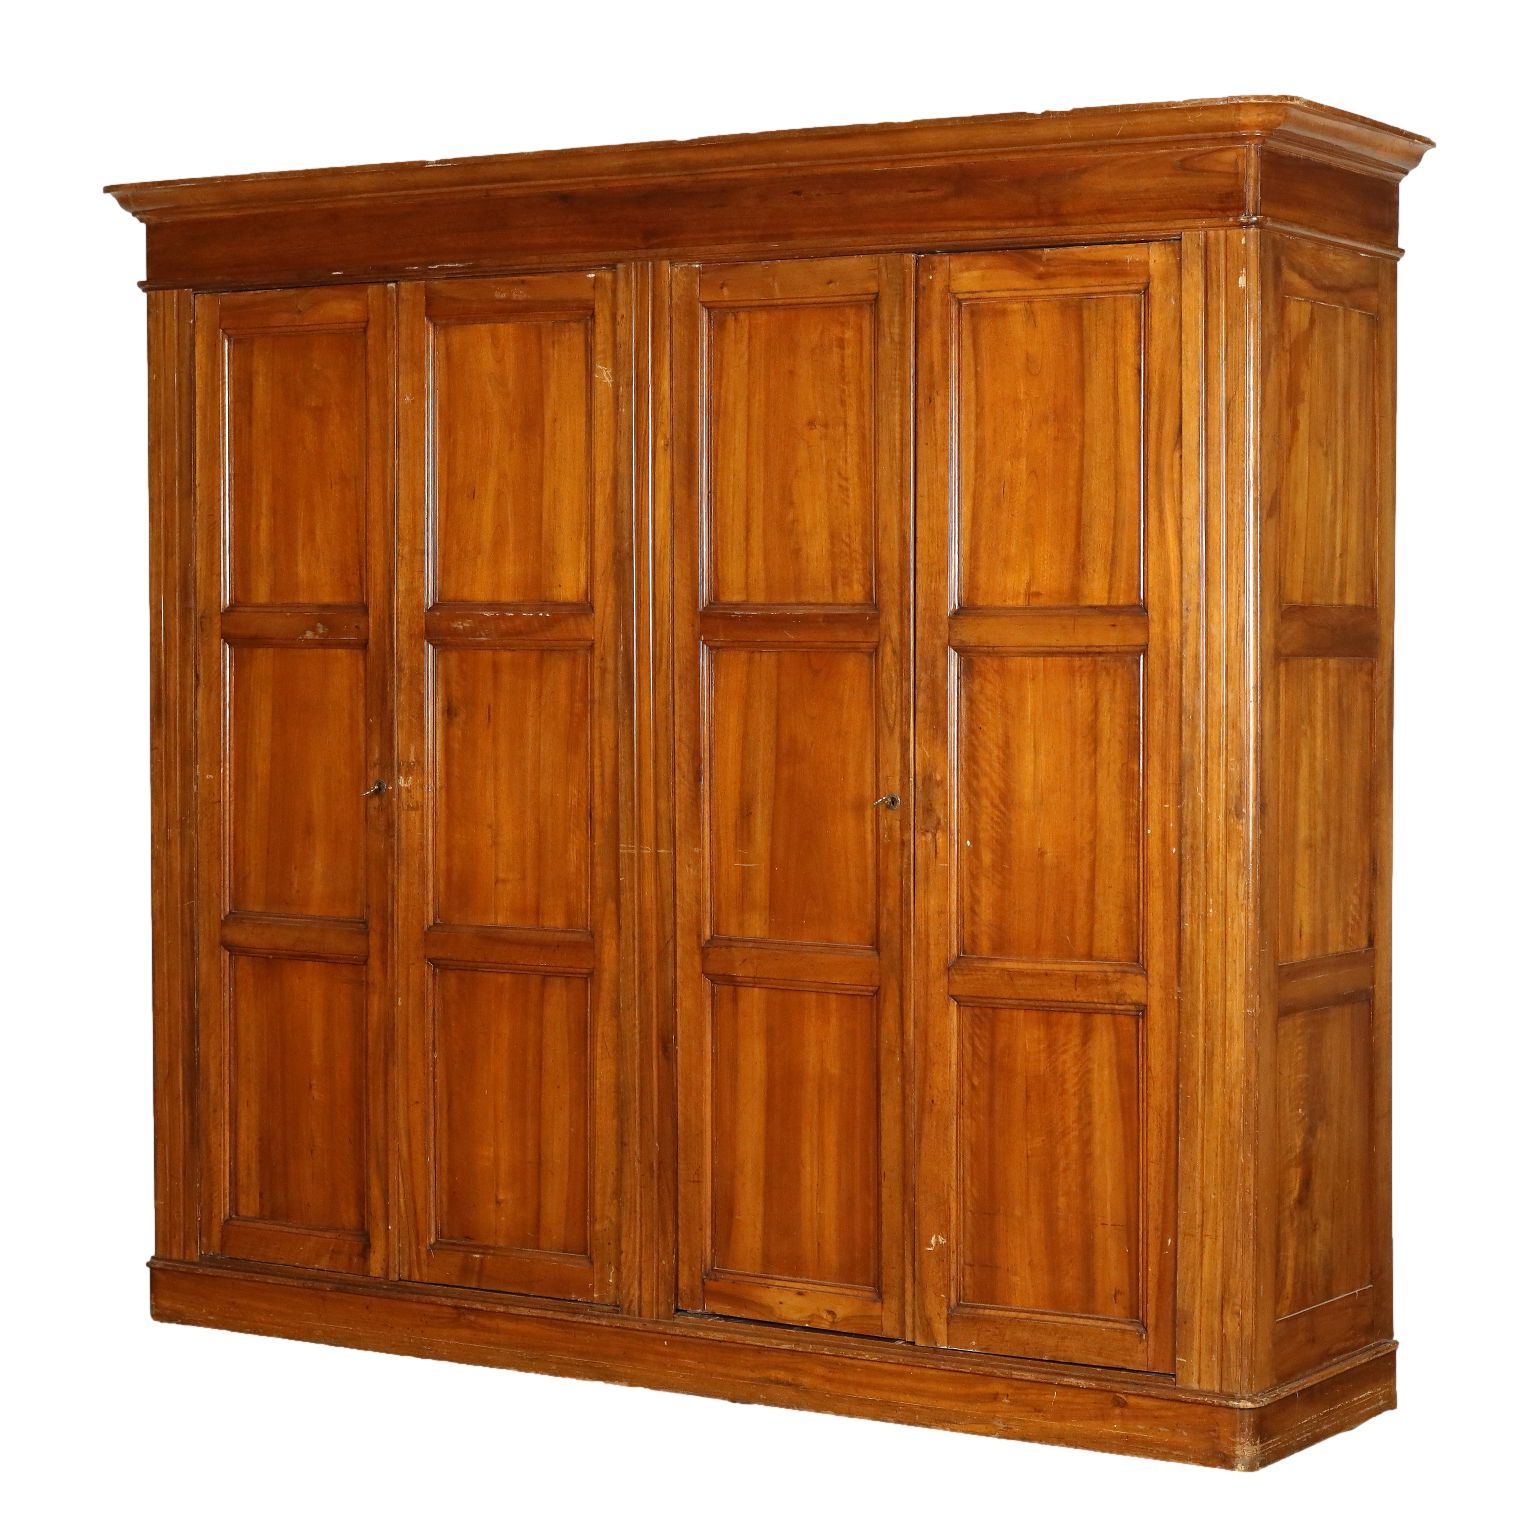 Ancient Umbertine Wardrobe Late '800 Wood Velvet Upholstery 4 Doors With Regard To Antique Wardrobes (View 14 of 20)